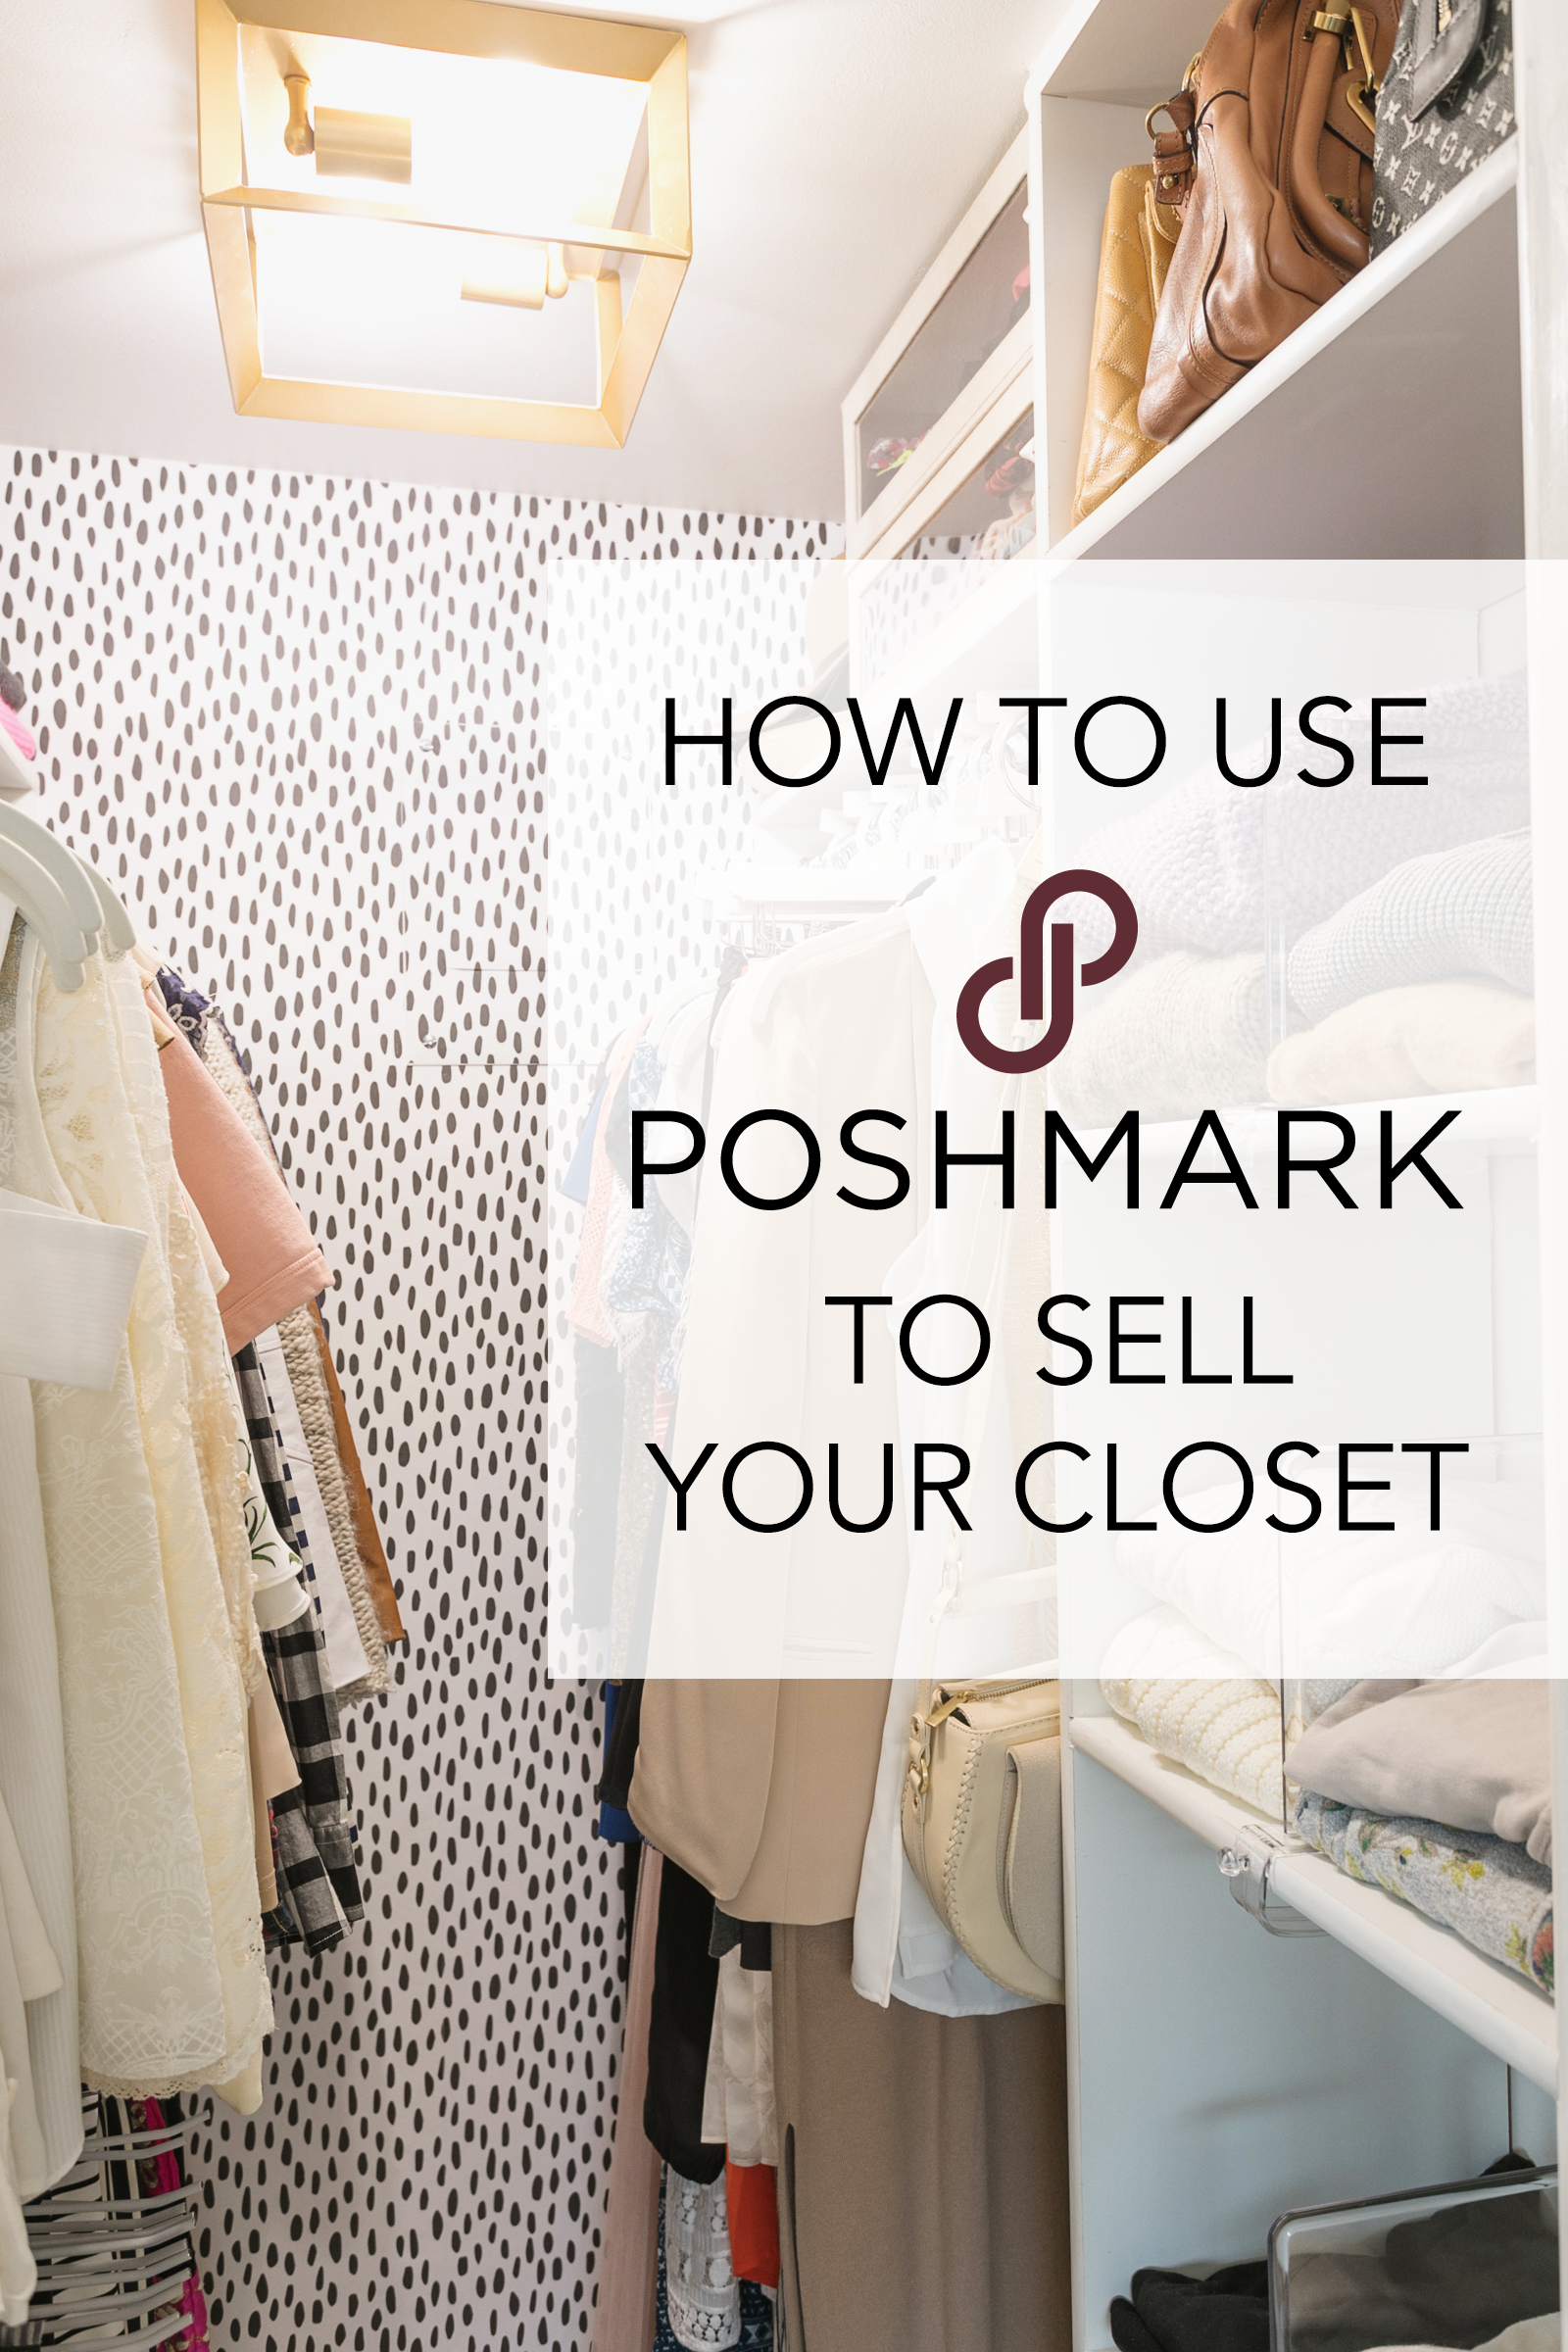 how to use poshmark app to sell closet items make money from used clothes